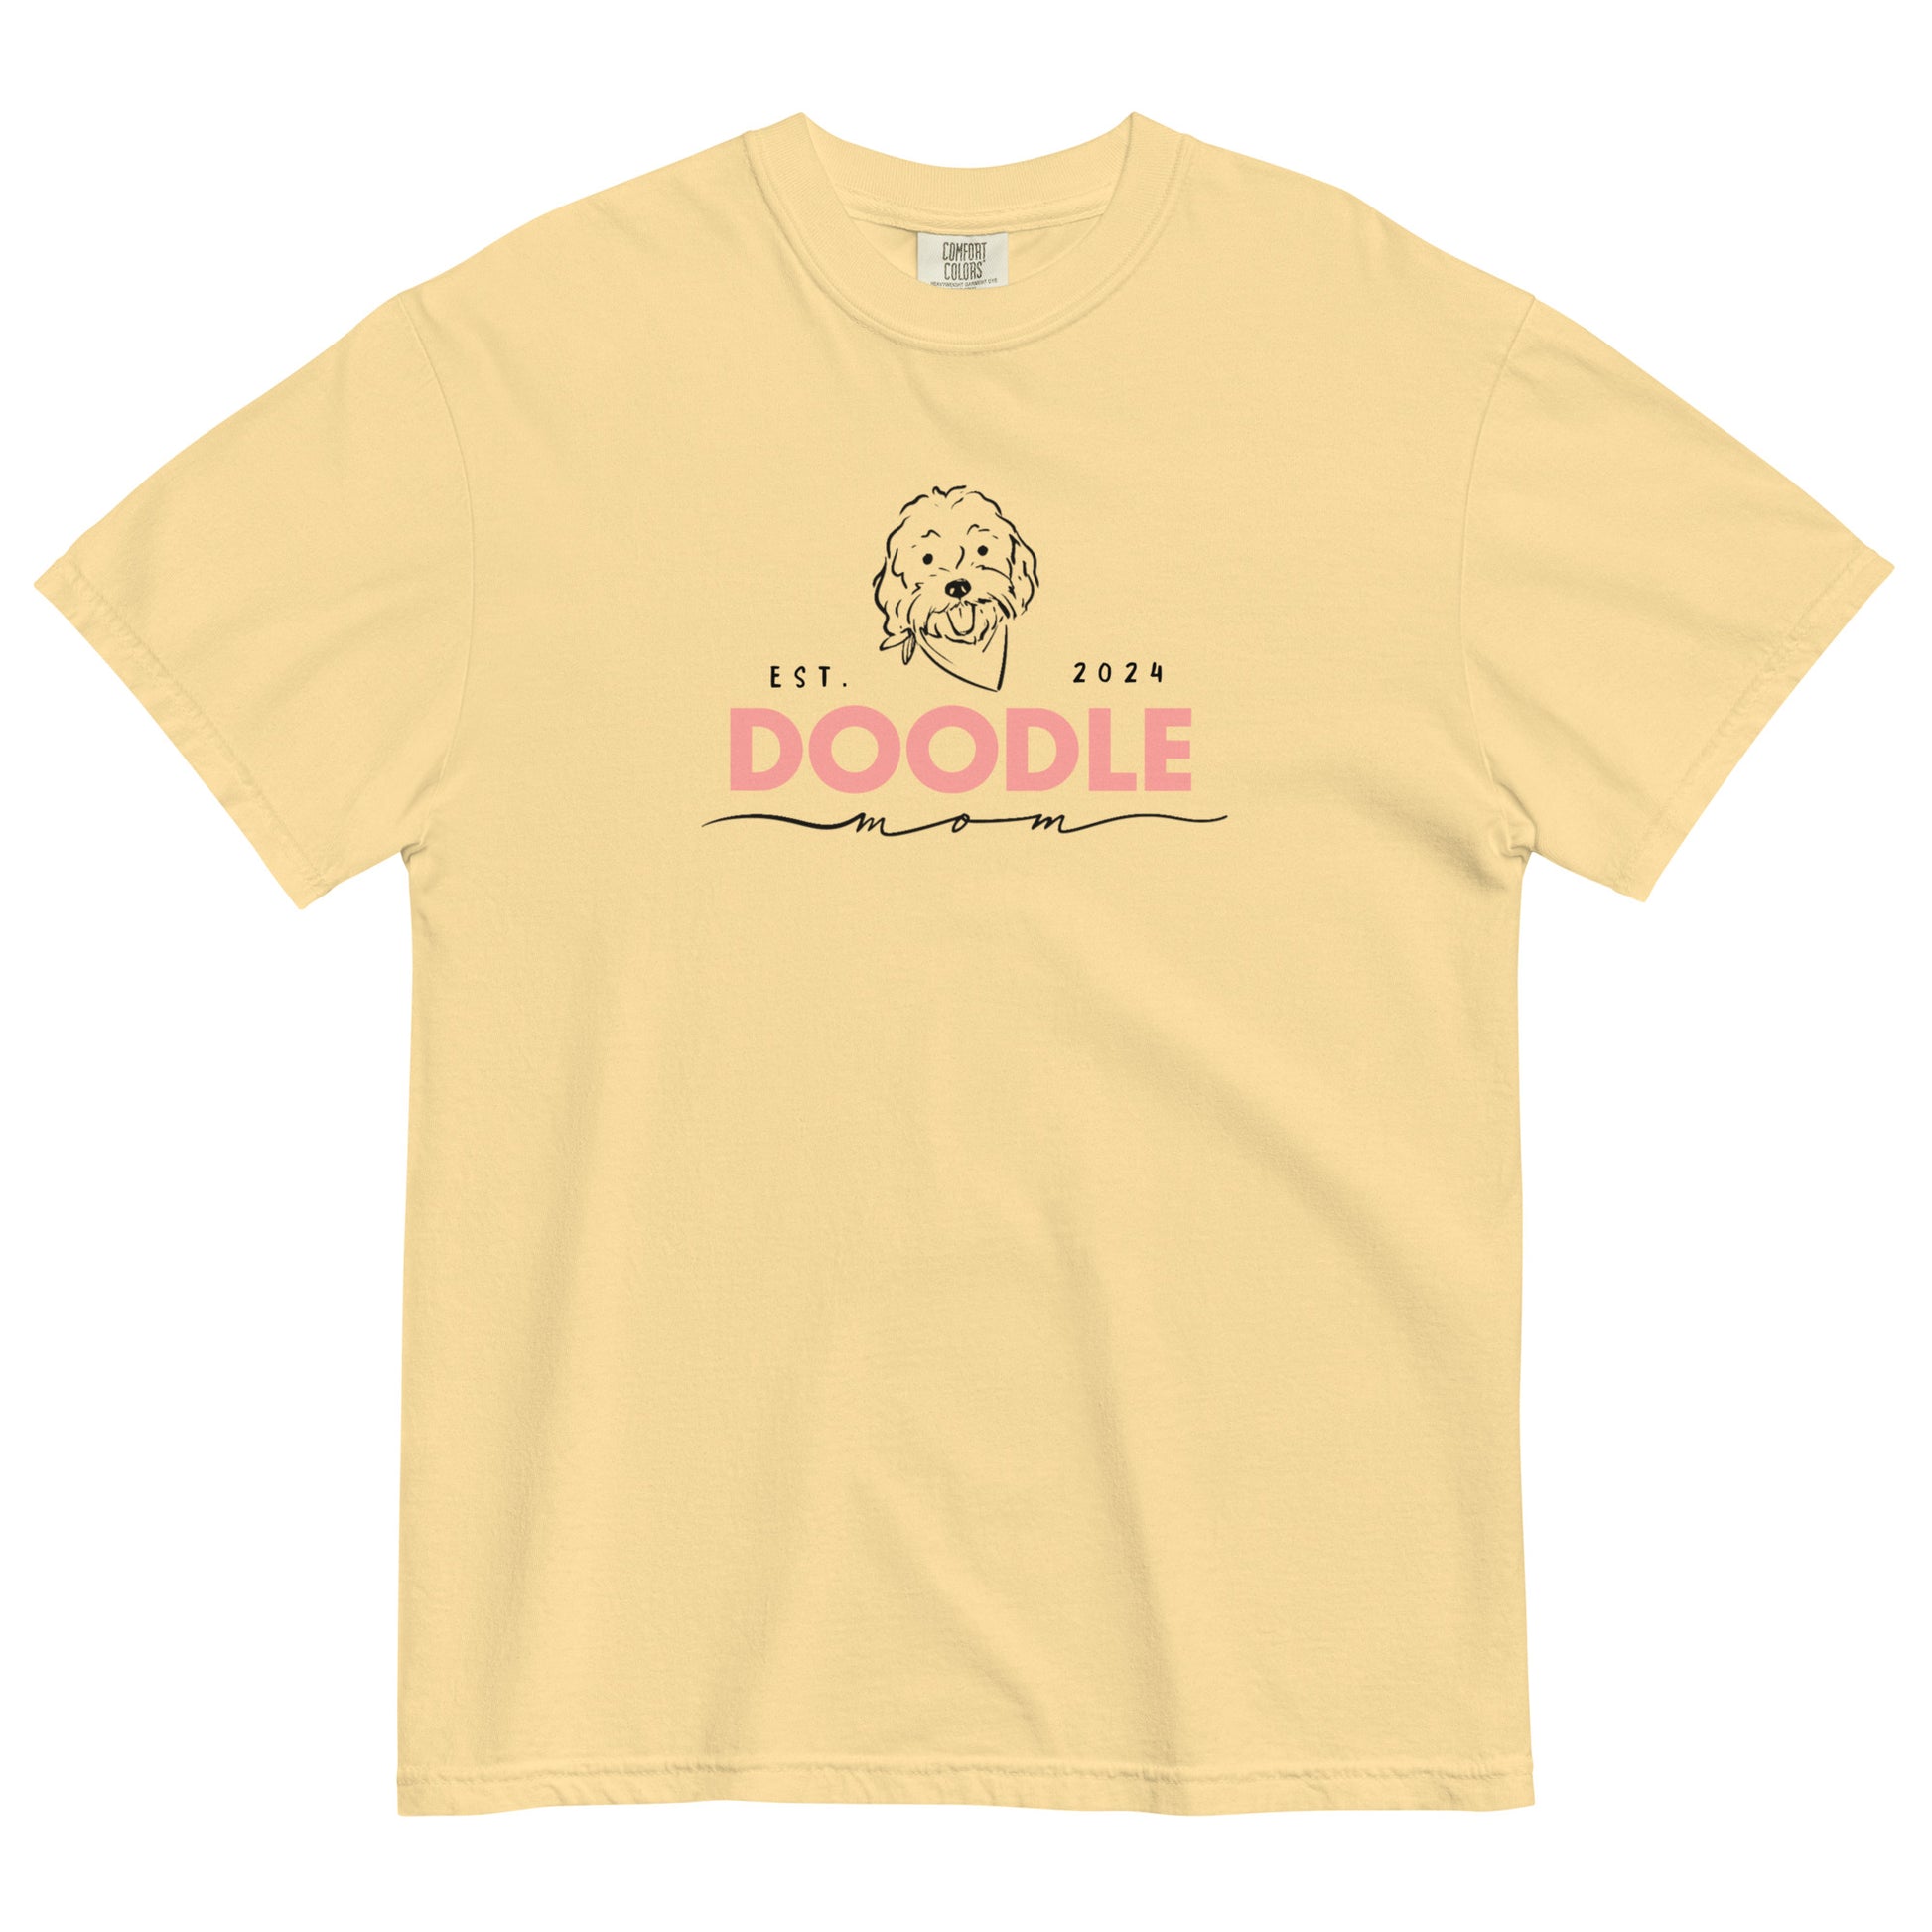 This Goldendoodle t-shirt features the phrase, "Doodle Mom Est. 2024" and a cute Doodle dog's face printed on the front of a cozy Comfort Colors shirt in butter yellow color